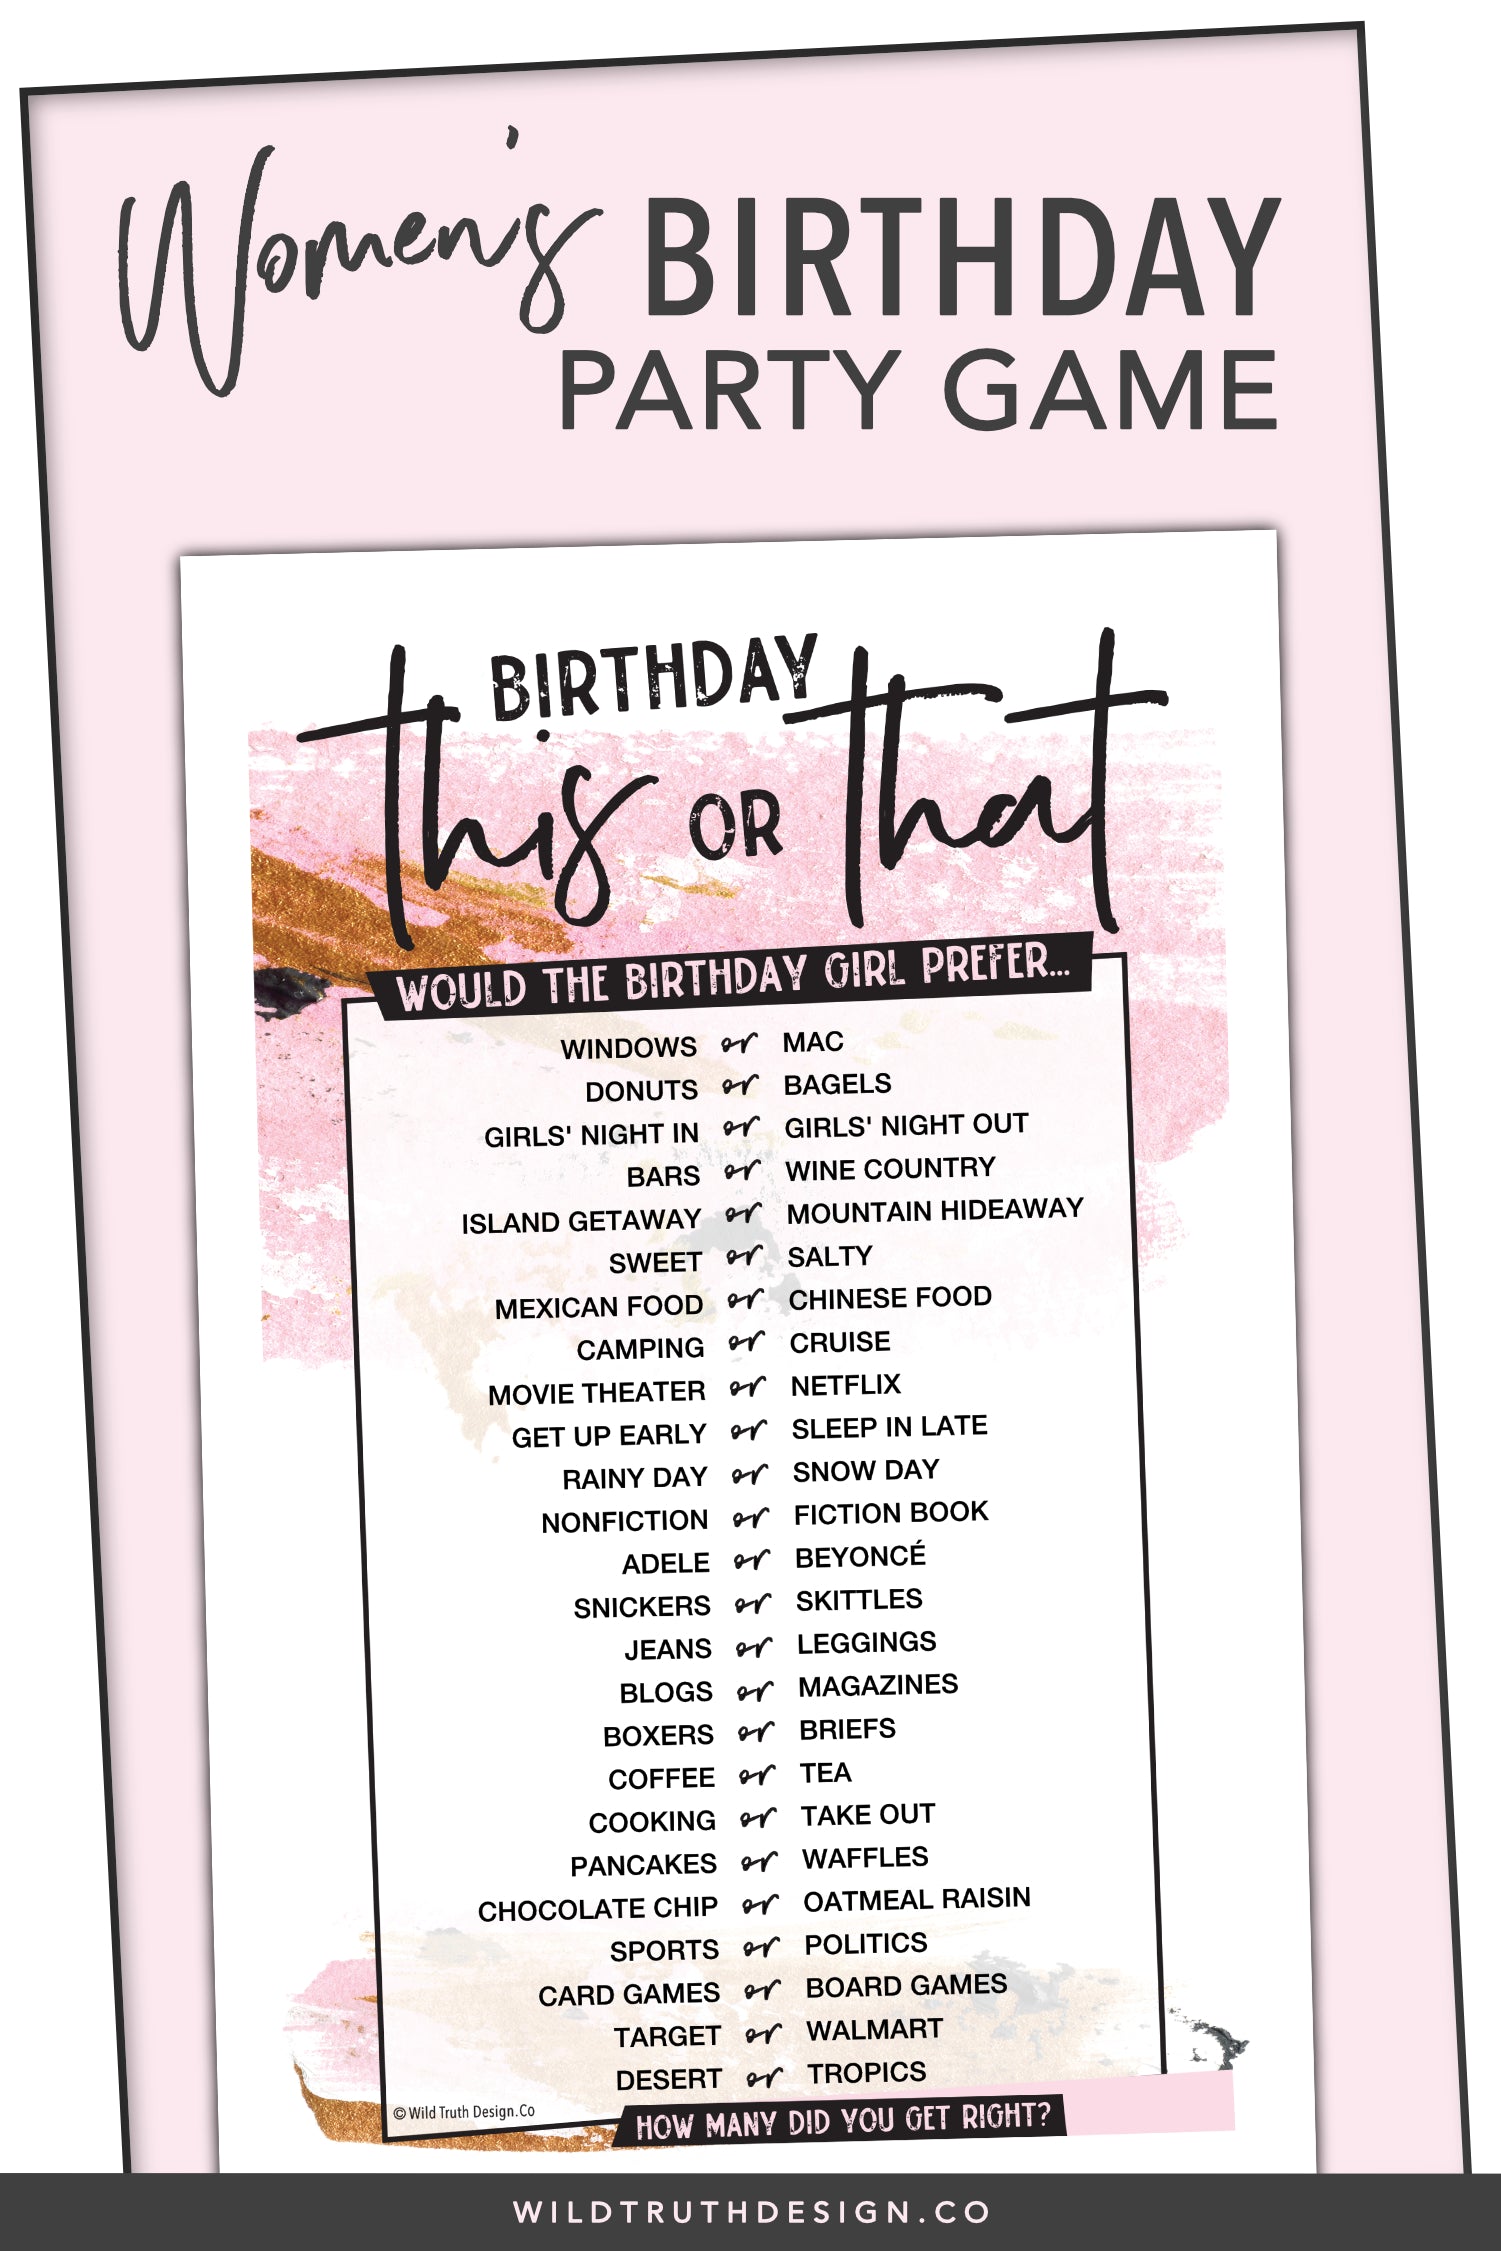 This Or That Womens Birthday Party Game